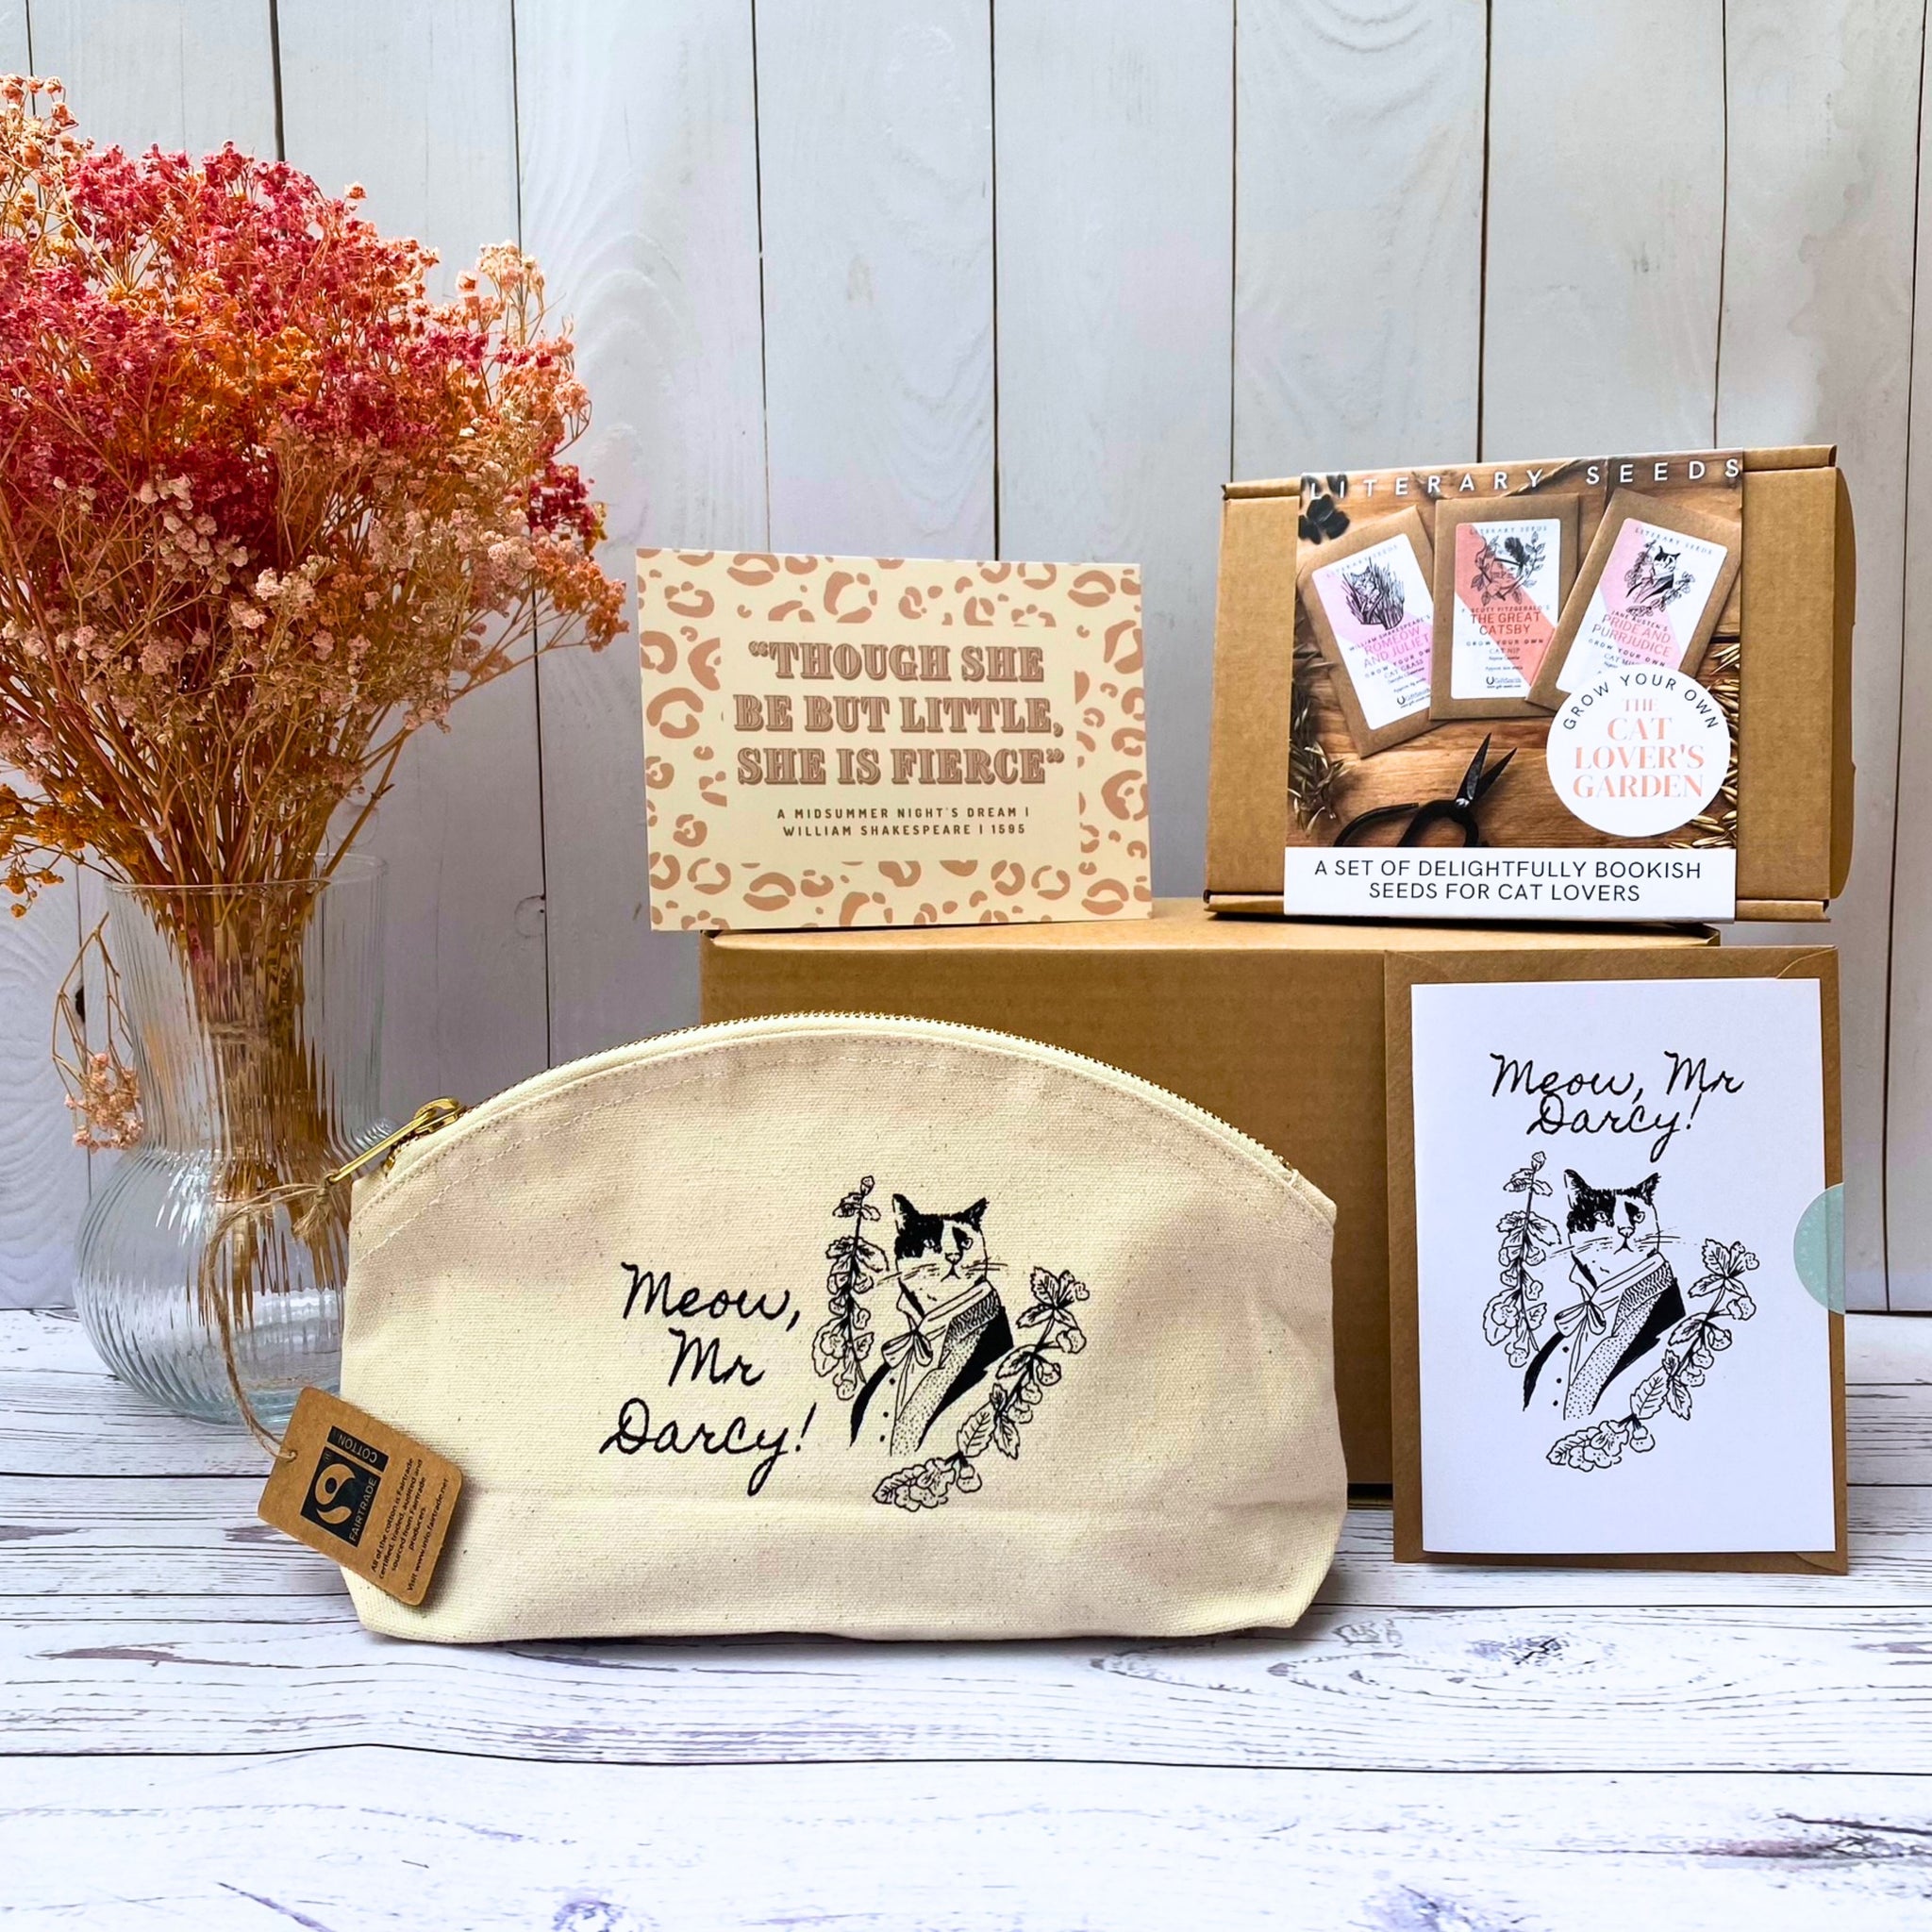 The Cat Lover's Paradise Bookish Gift Box